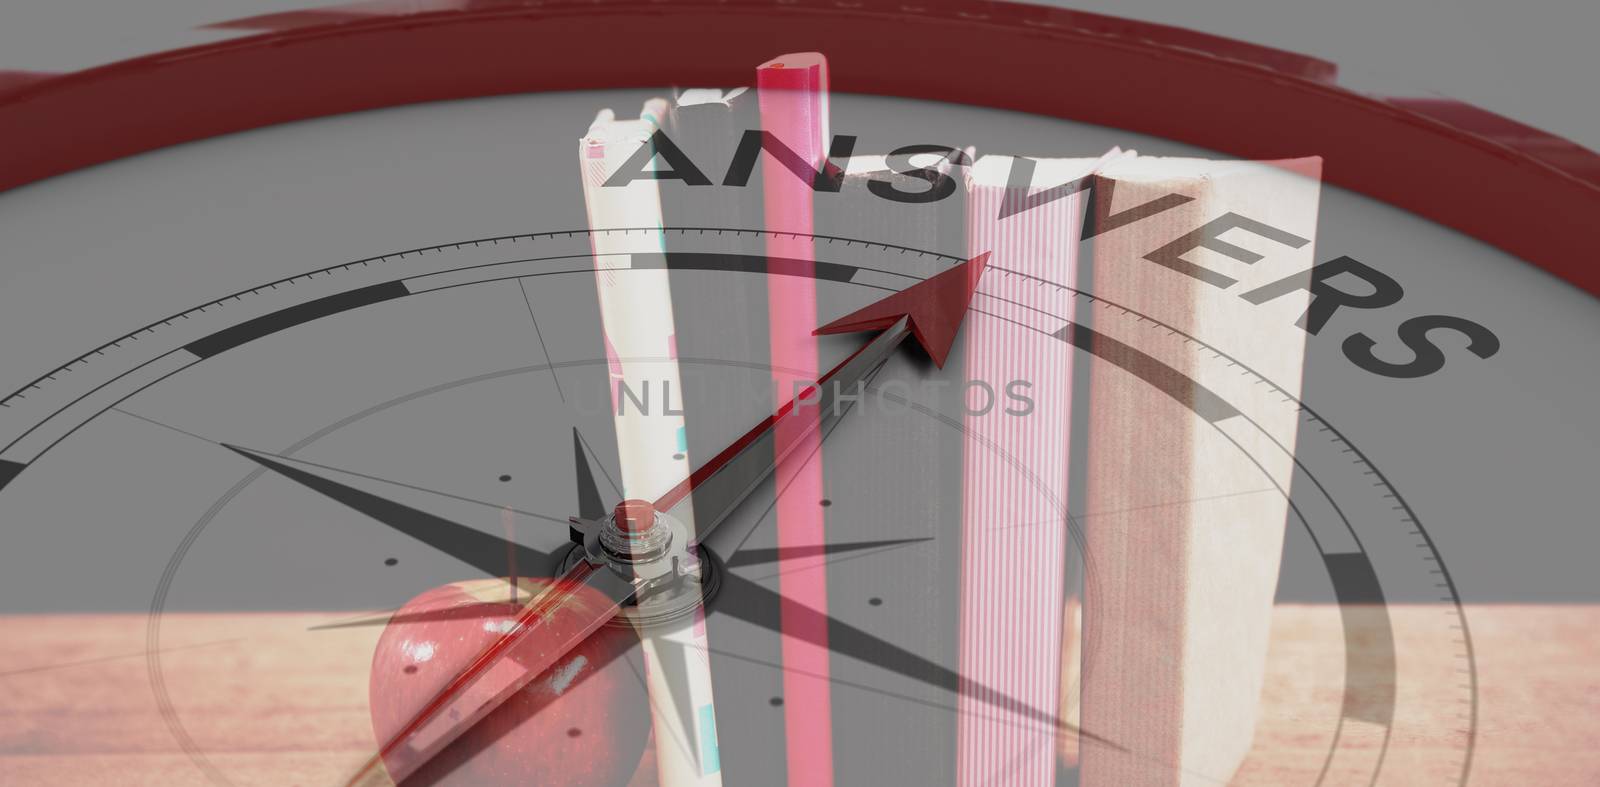 Composite image of compass pointing to answers by Wavebreakmedia